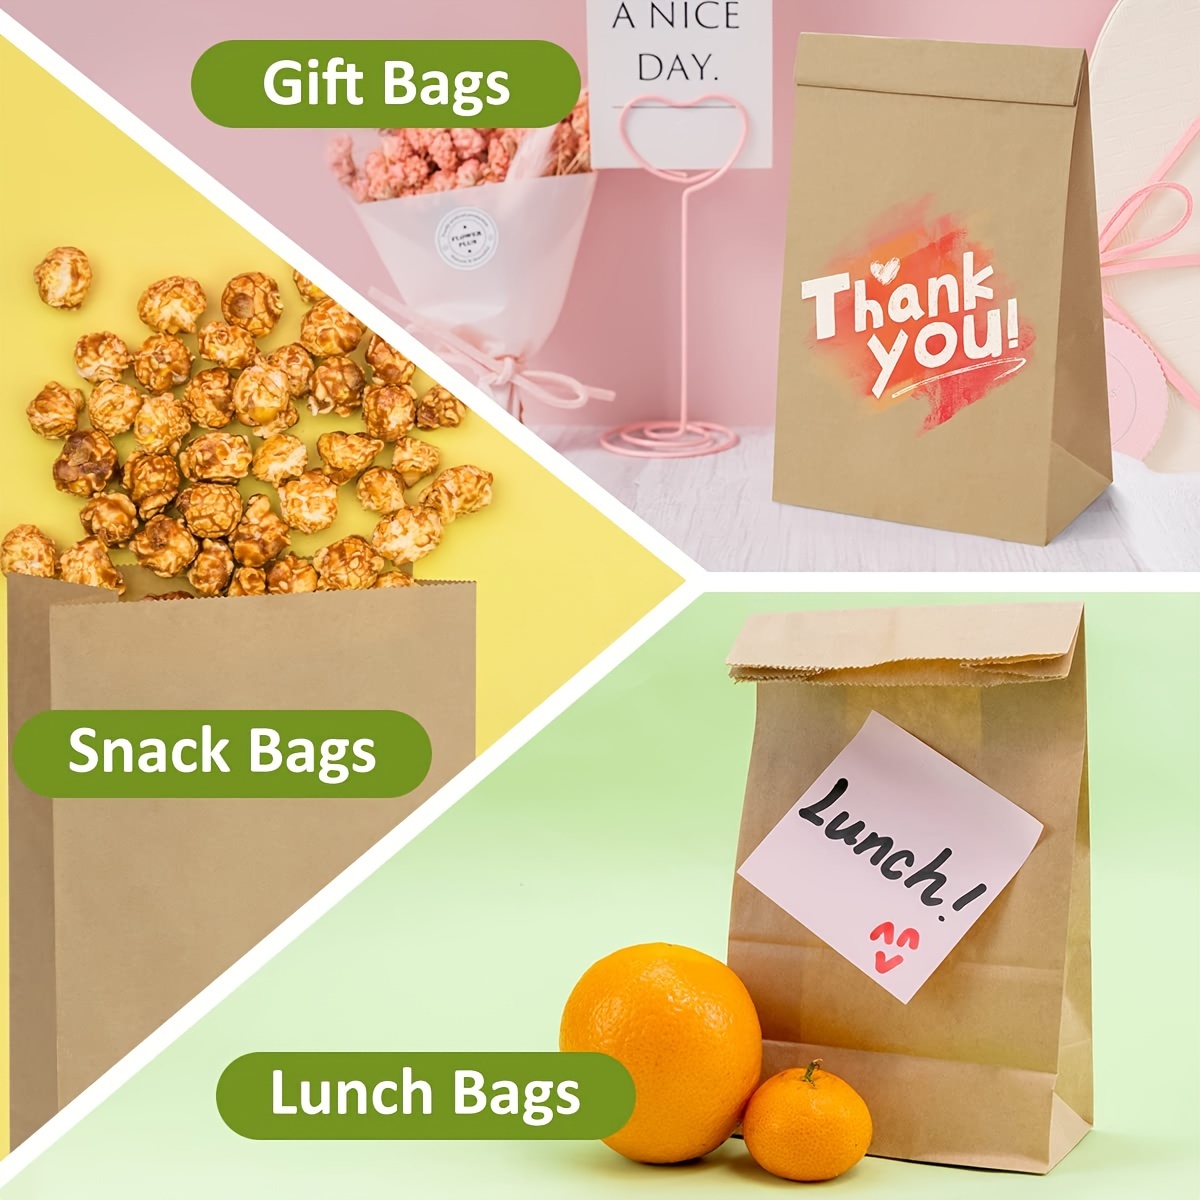 Paper Lunch Bags 50 Count Large White Lunch Bags Kraft White Paper